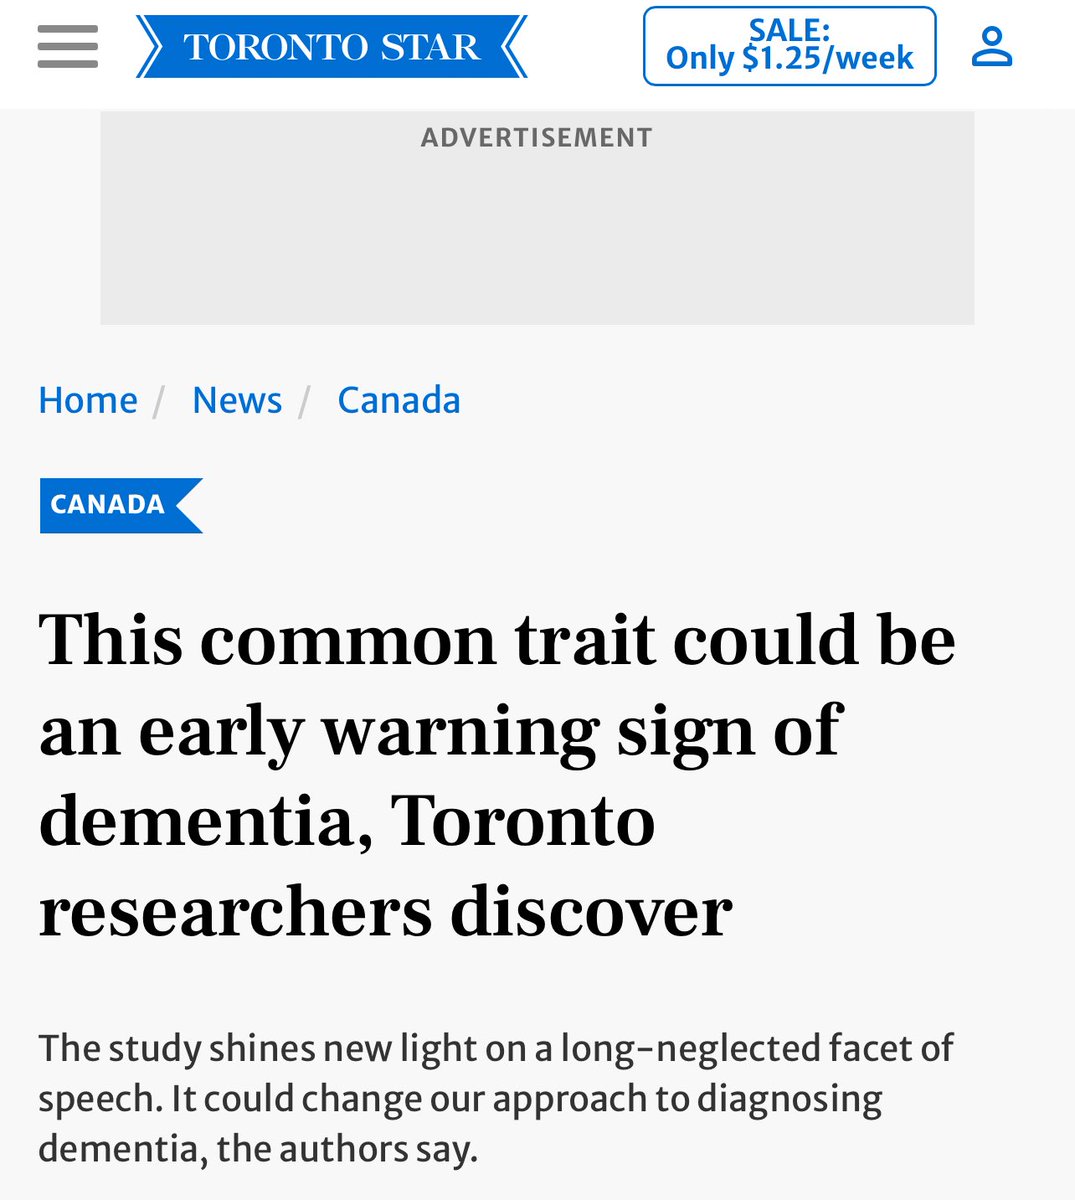 An interesting study in a good direction. A larger & more diverse sample size will be important considering the role one's life experiences & cultural background play in one's speech abilities. Thank you, Toronto Star, for interview. #dementia #research thestar.com/news/canada/th…